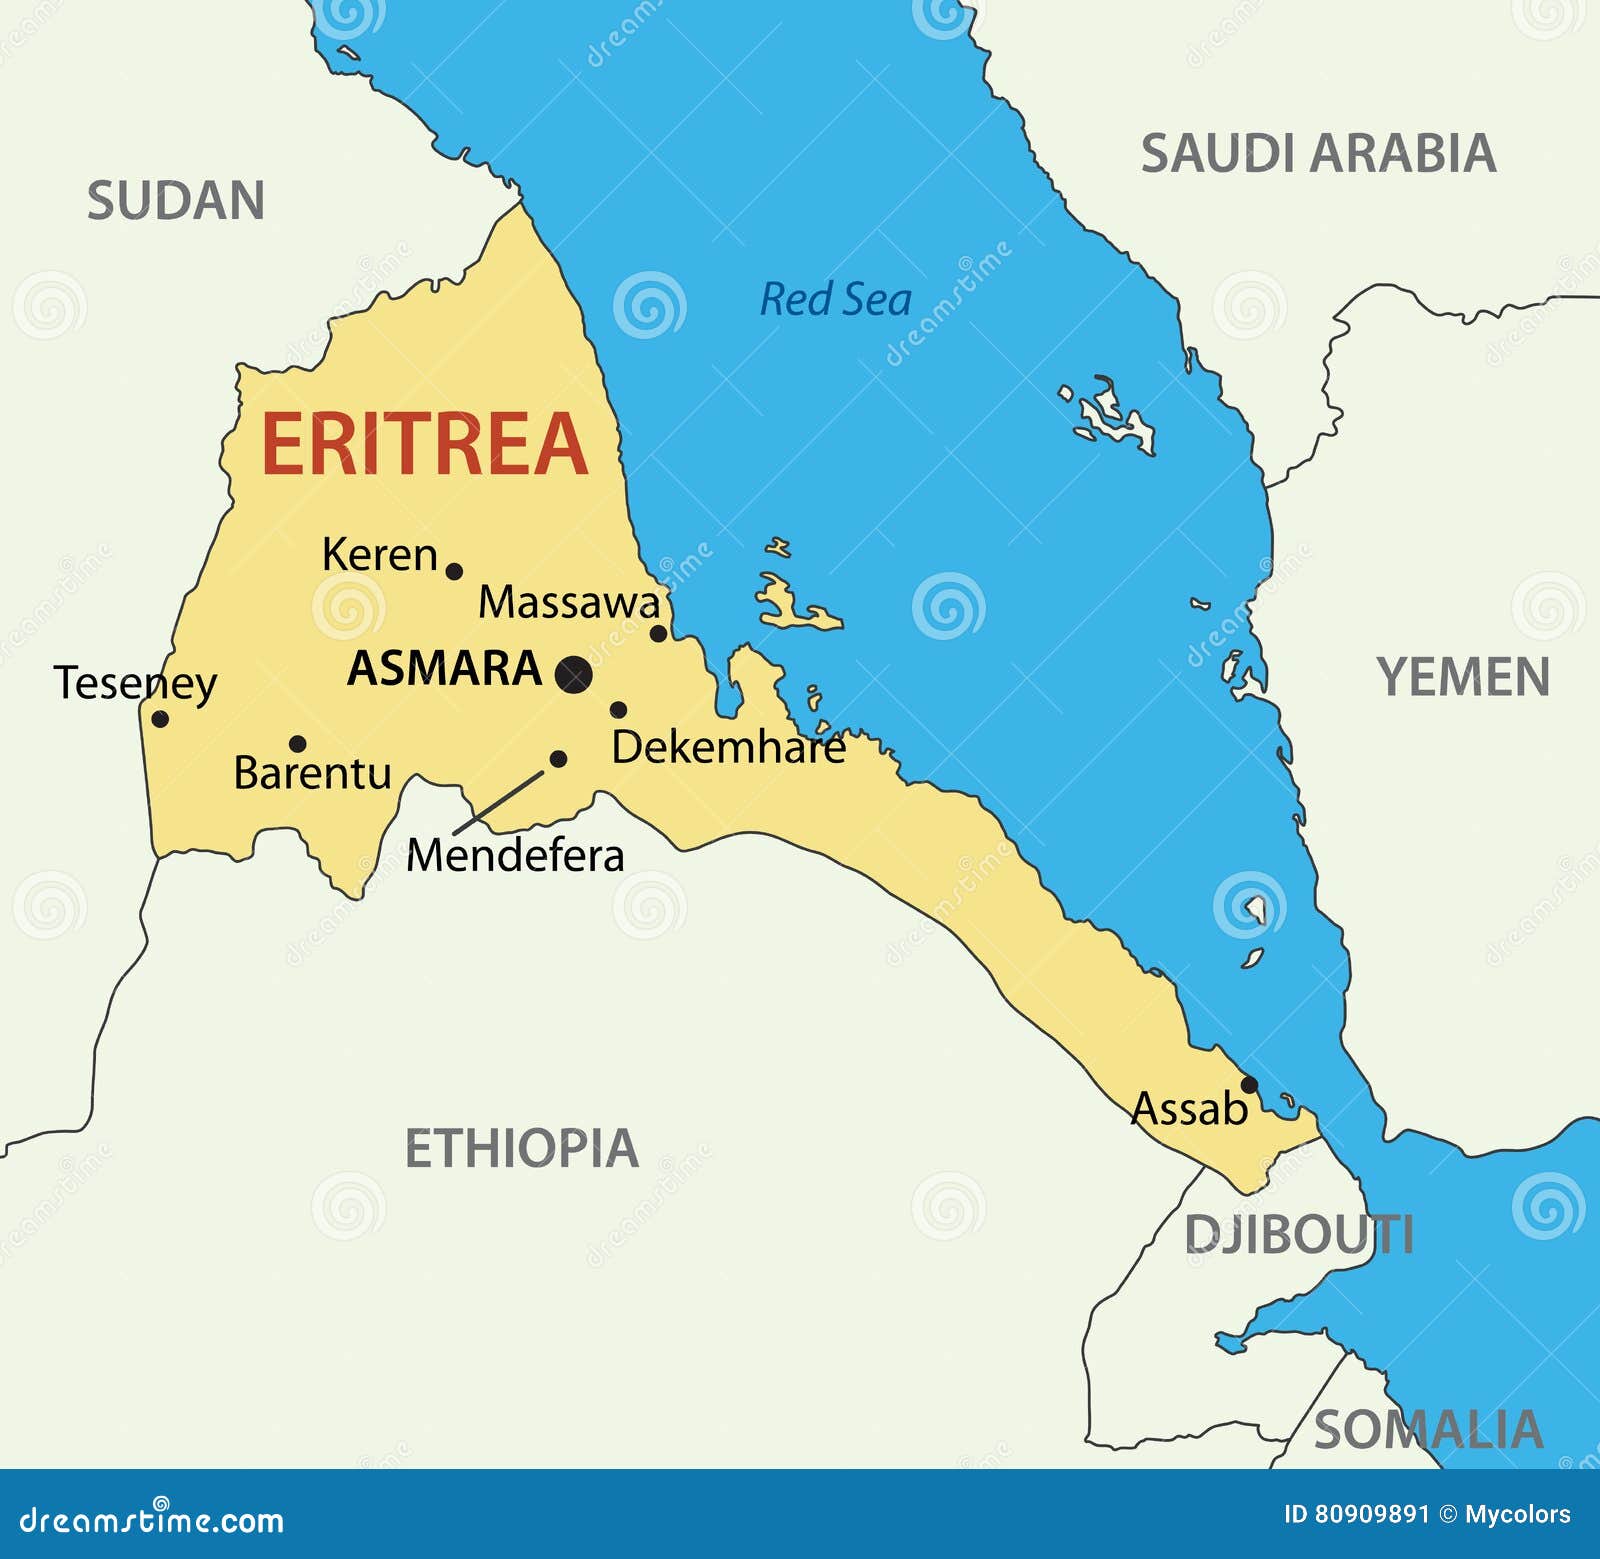 State of Eritrea - Map - Vector Stock Vector - Illustration of